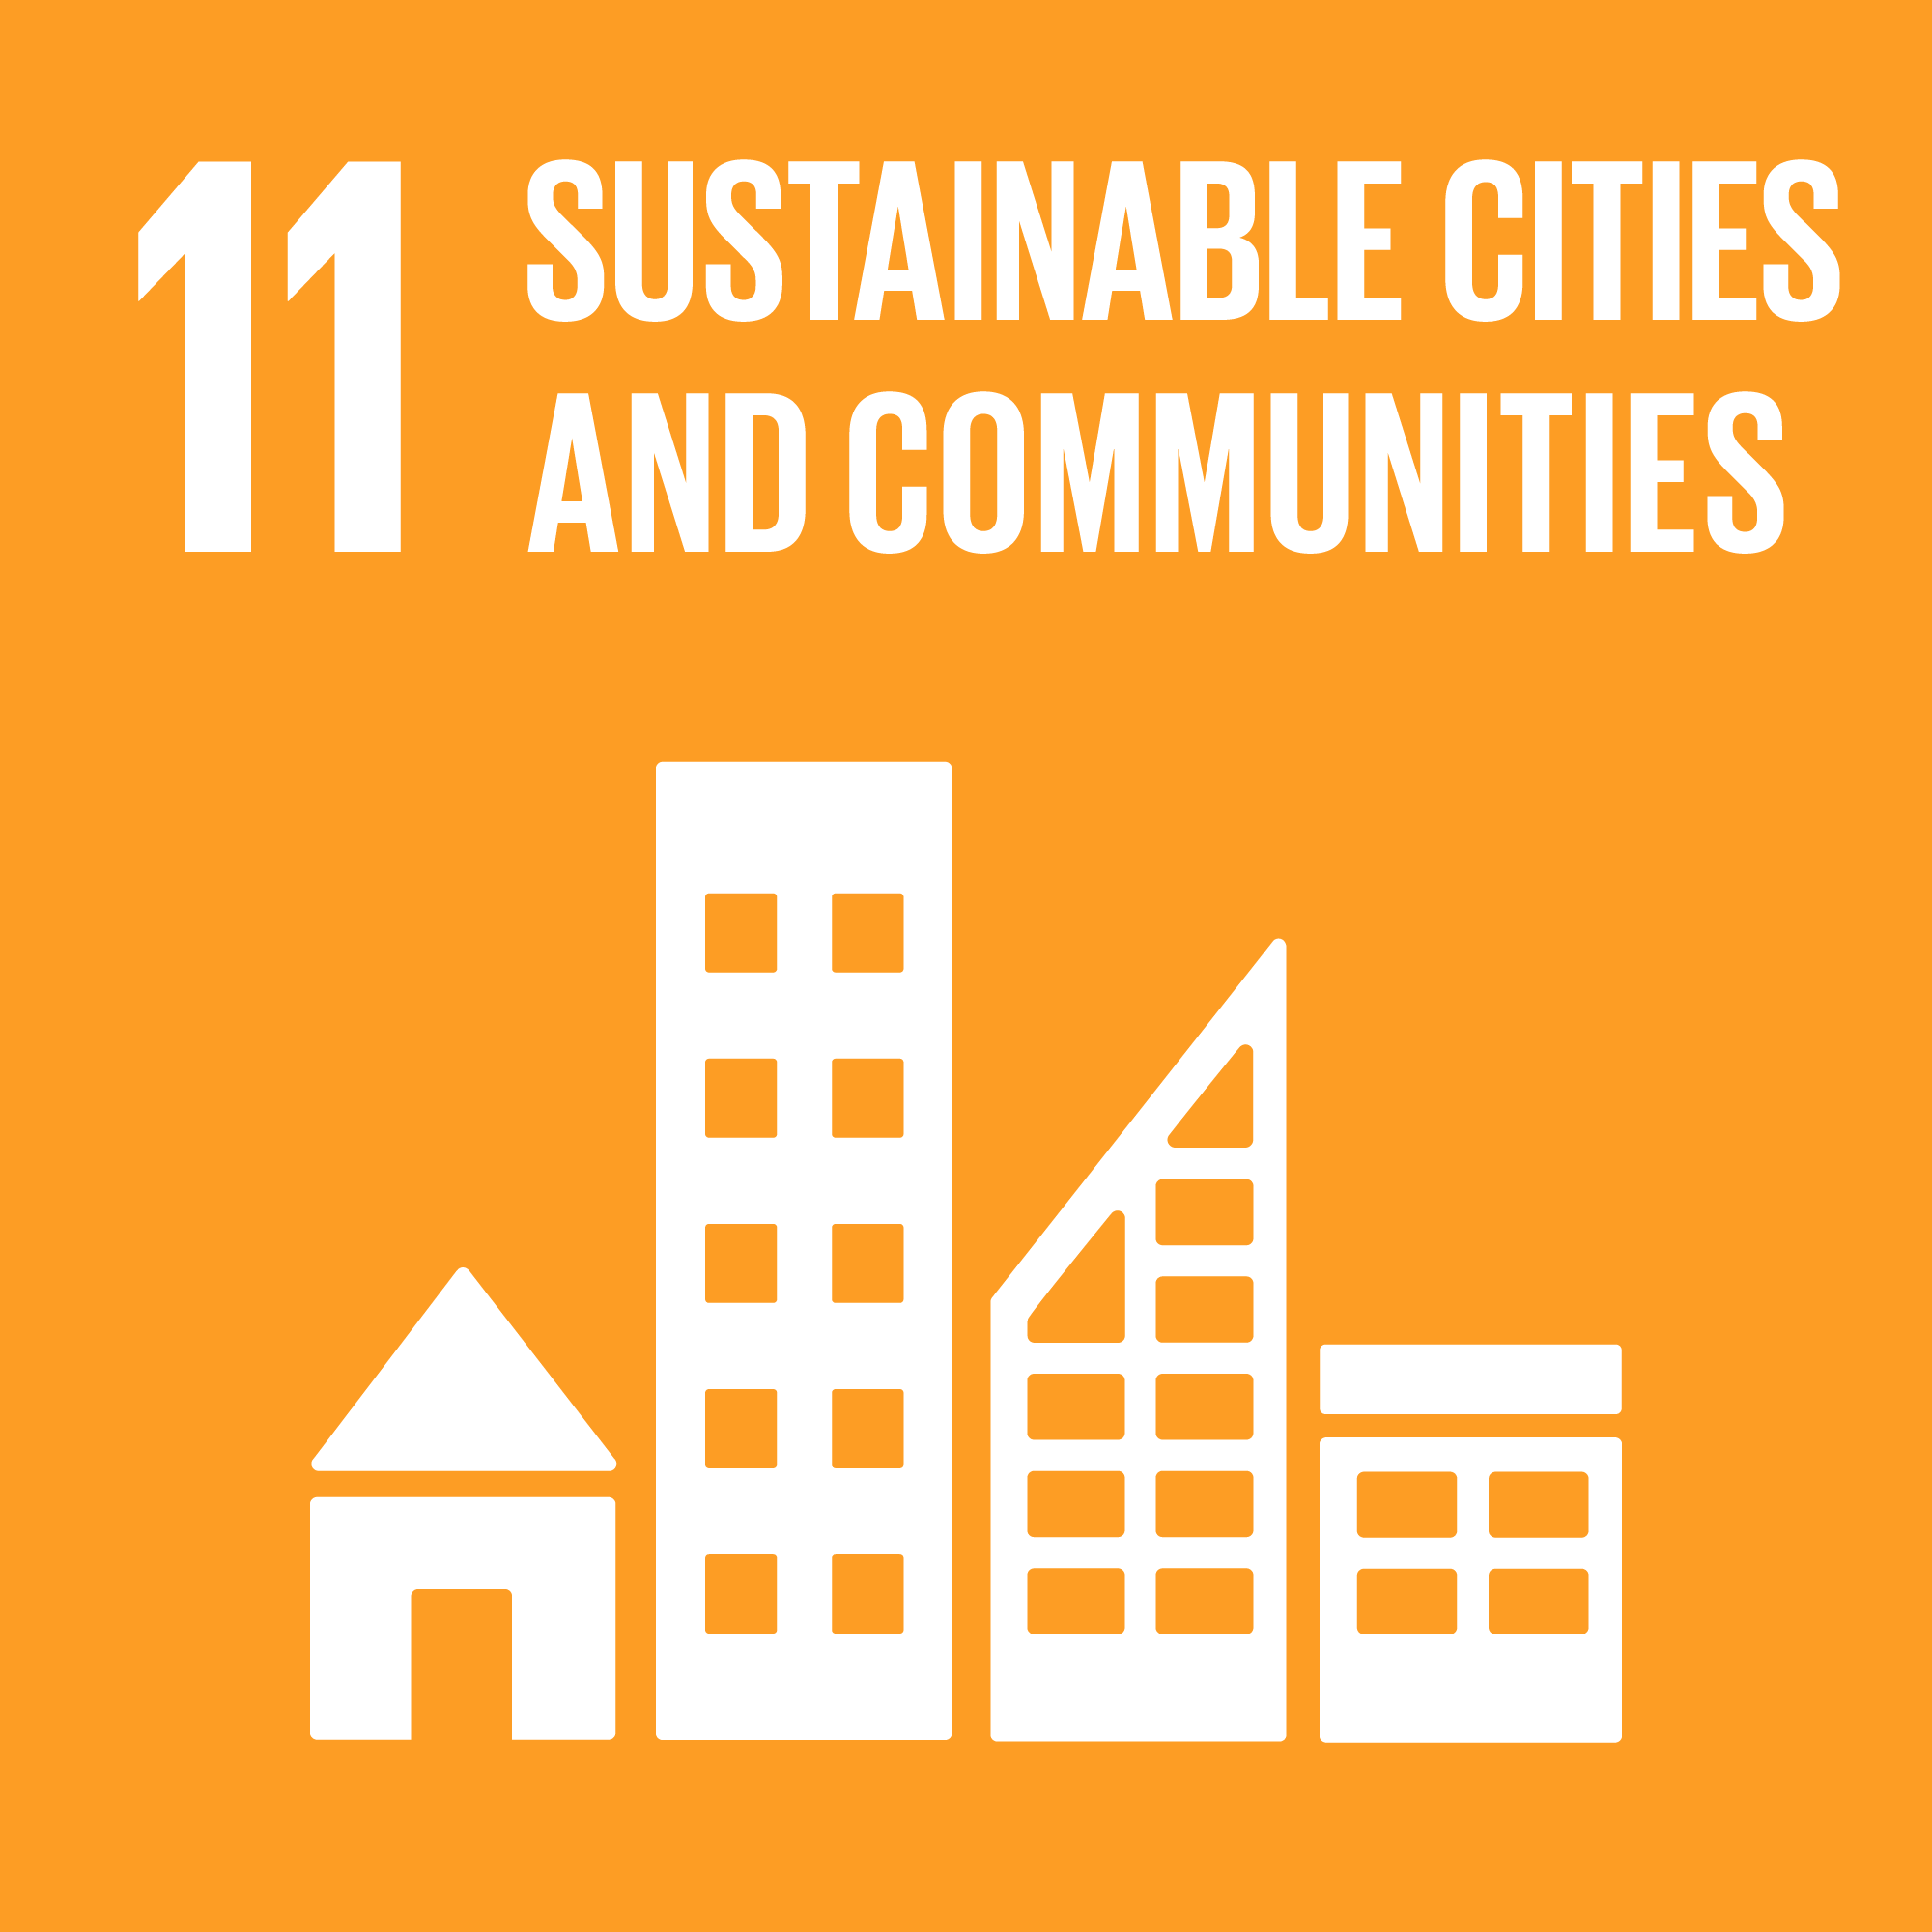 UNSDG 11: Sustainable Cities and Communities